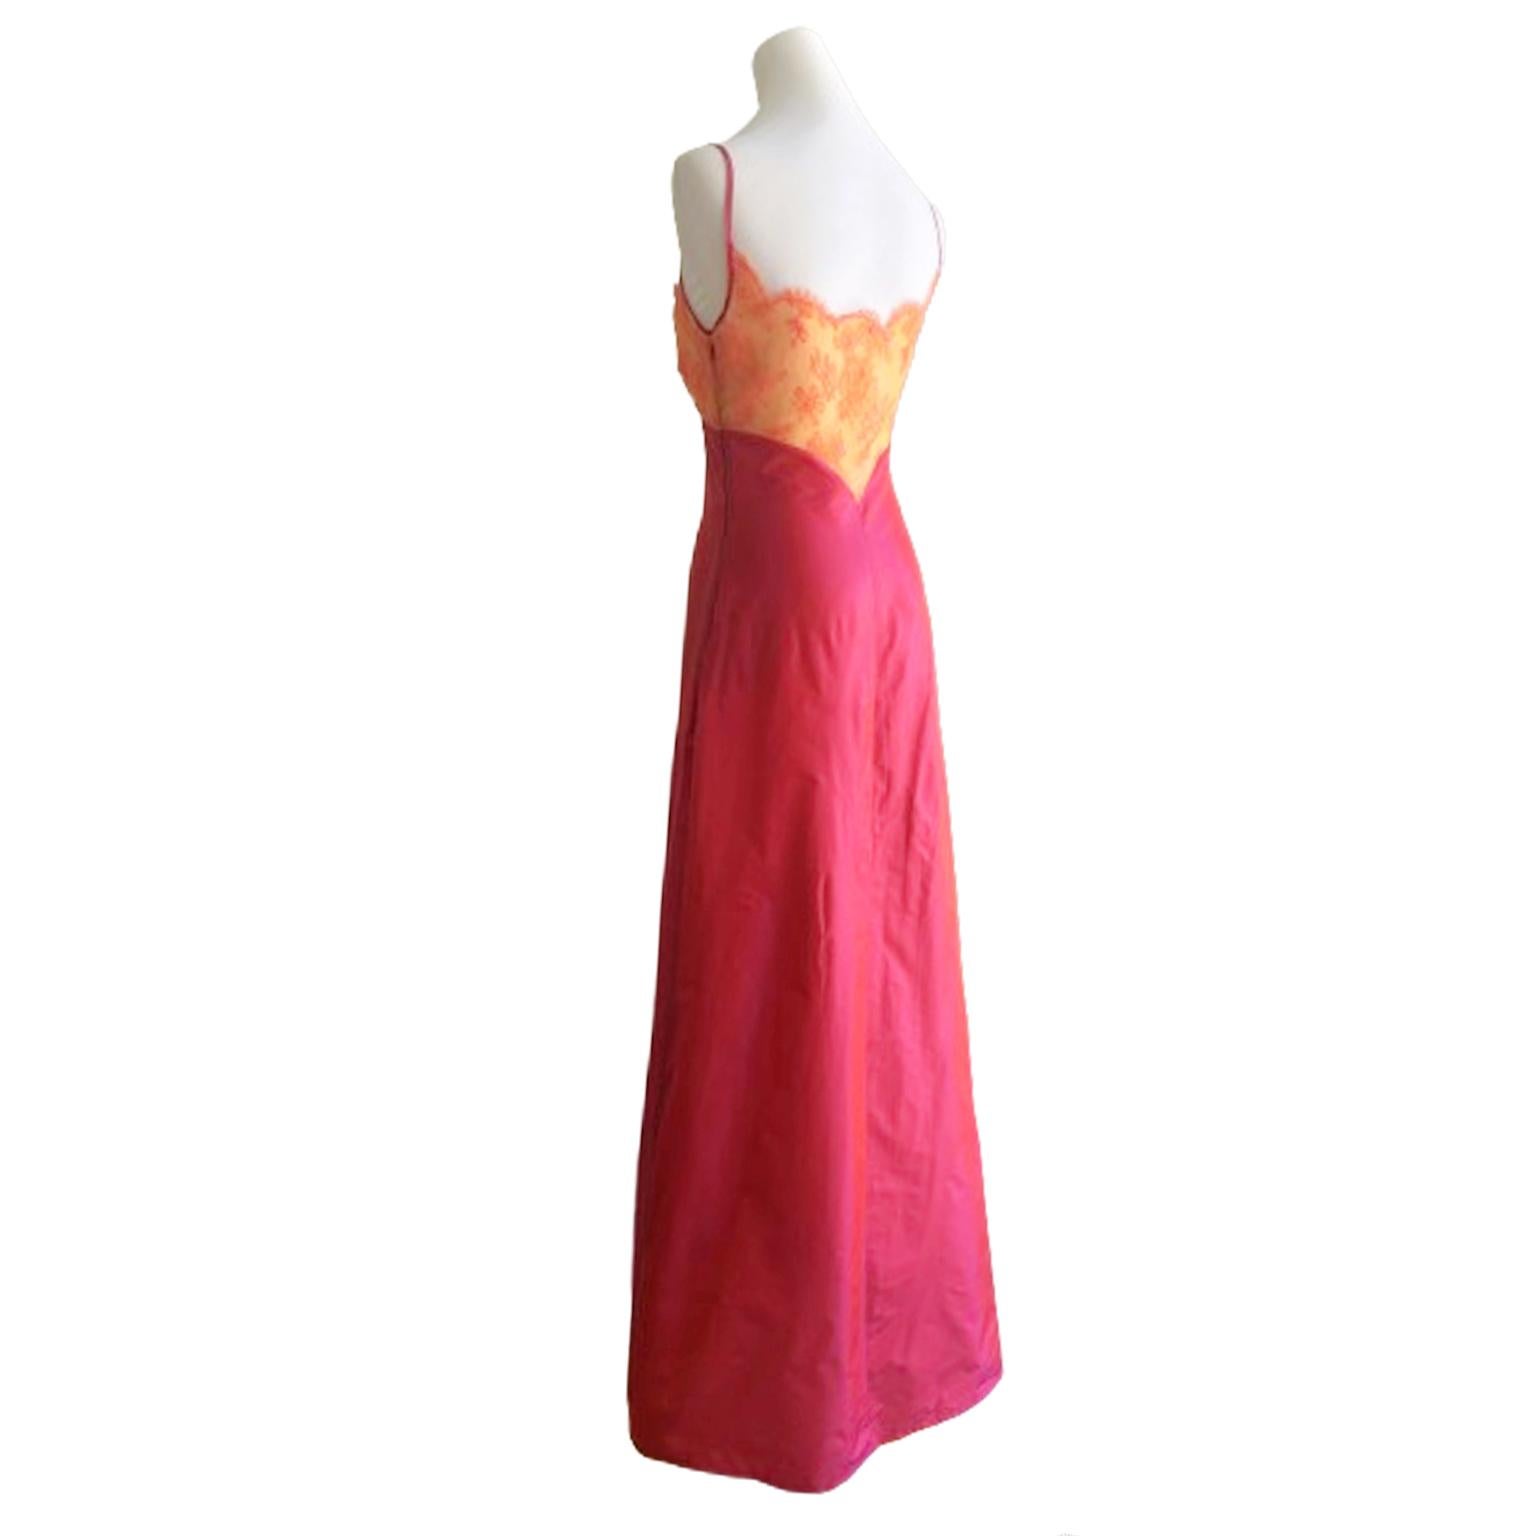 Emanuel Ungaro Collection Bicolour Strap Spaghetti Gown Dress NWOT In Excellent Condition For Sale In Berlin, DE